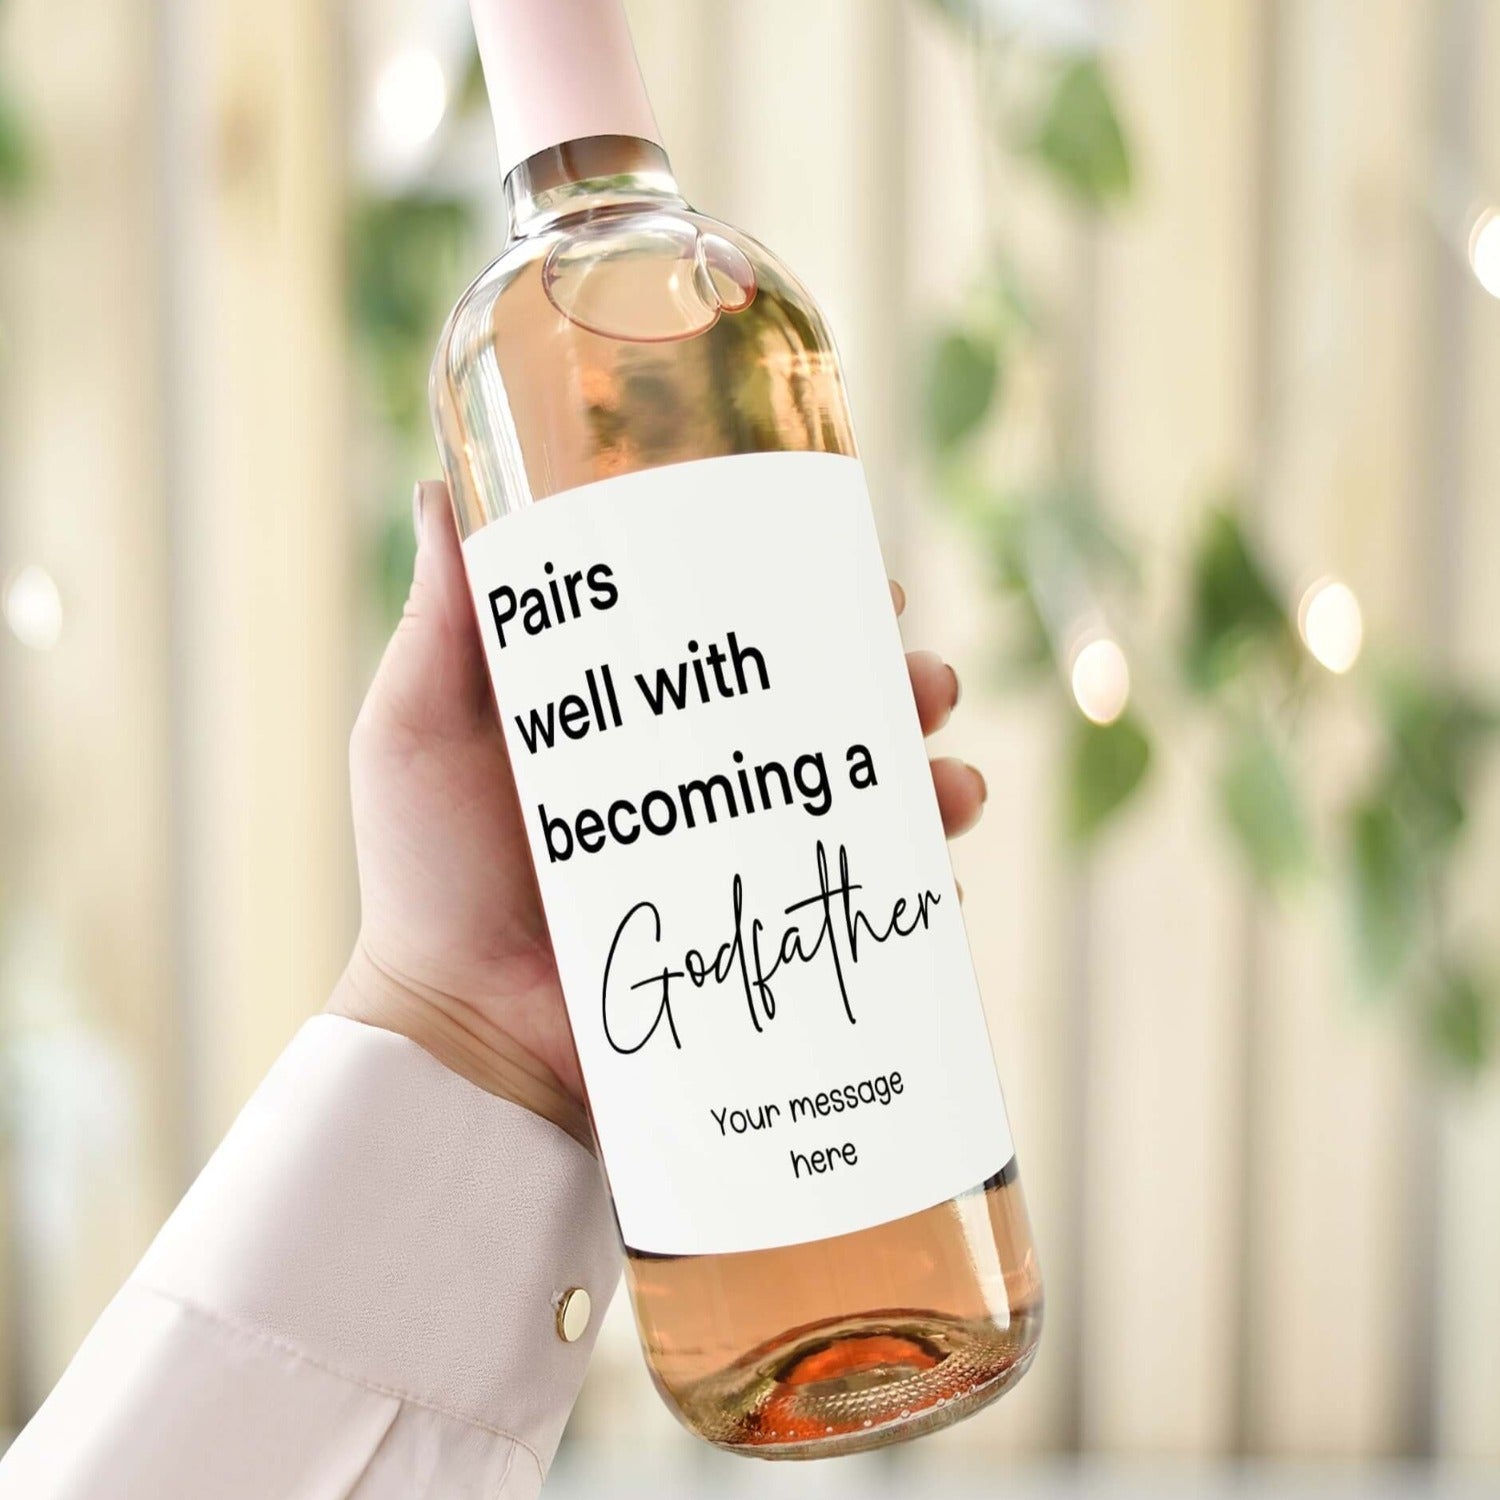 pairs well with becoming a godfather personalised wine label